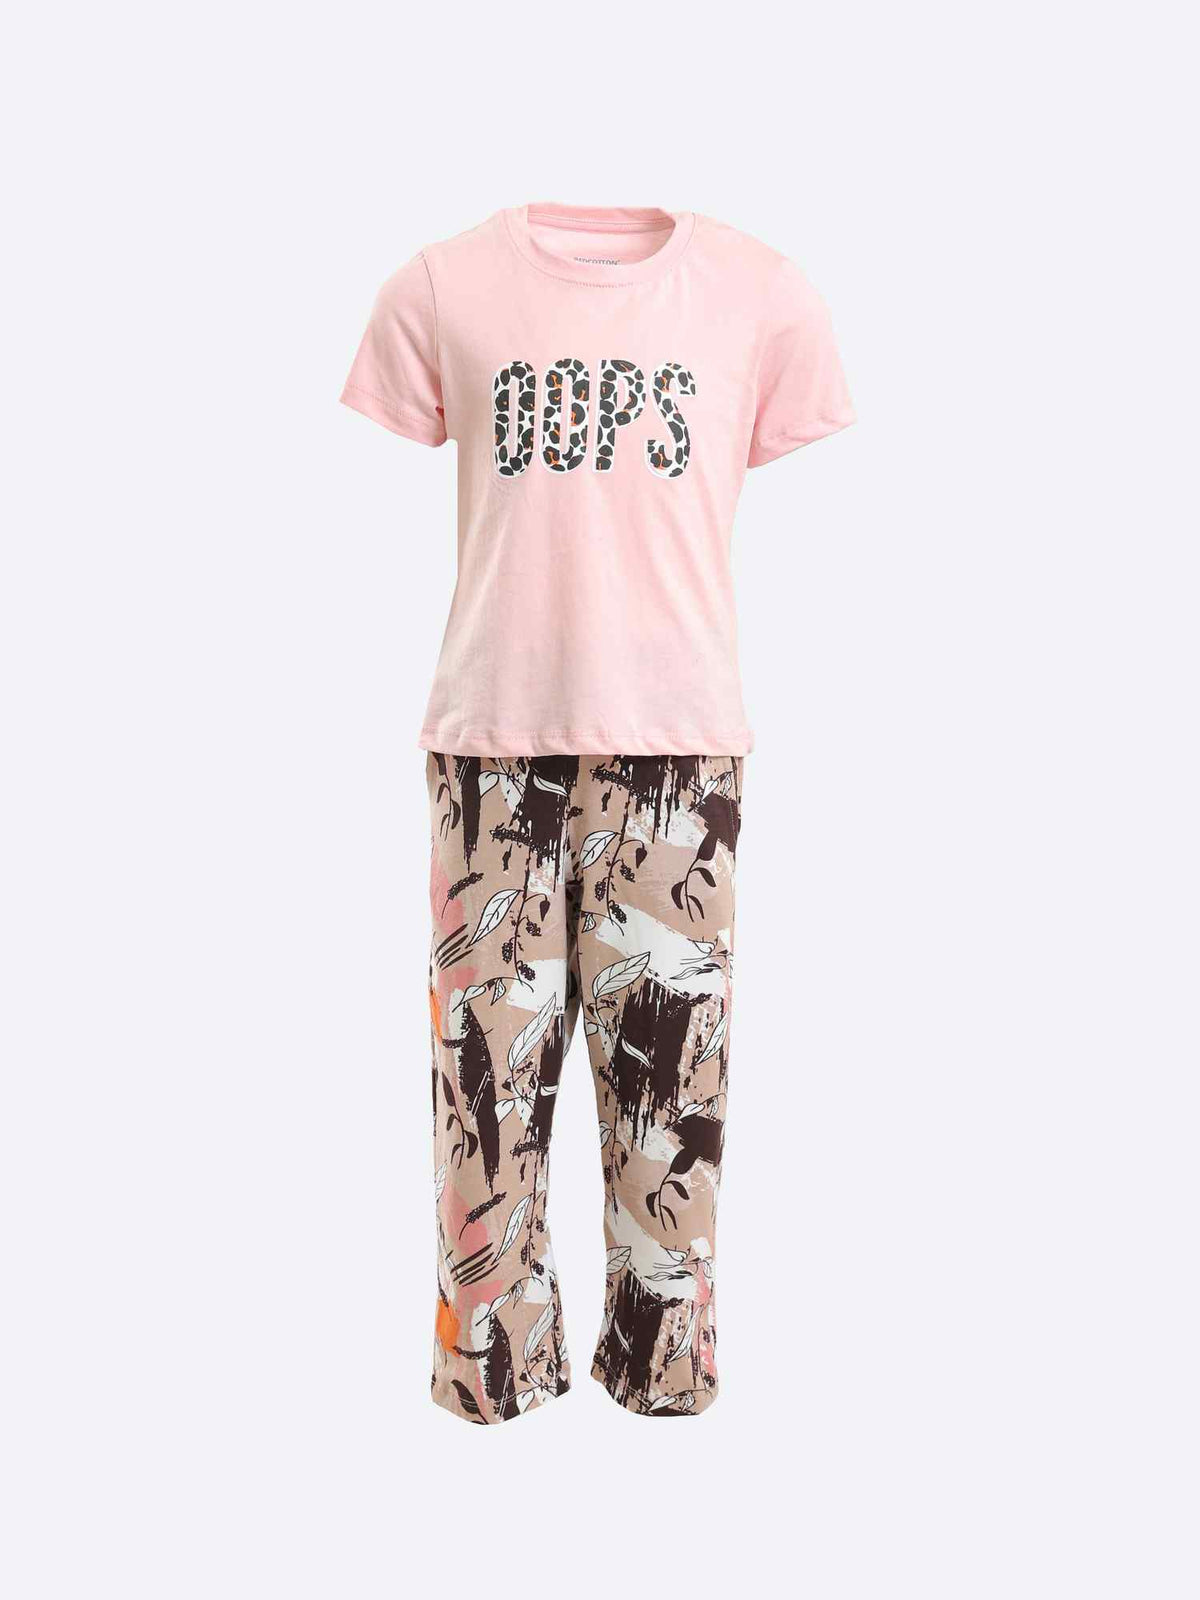 Girls OOPS Cotton Tee & Patterned Pants Pajama Set - Multicolour